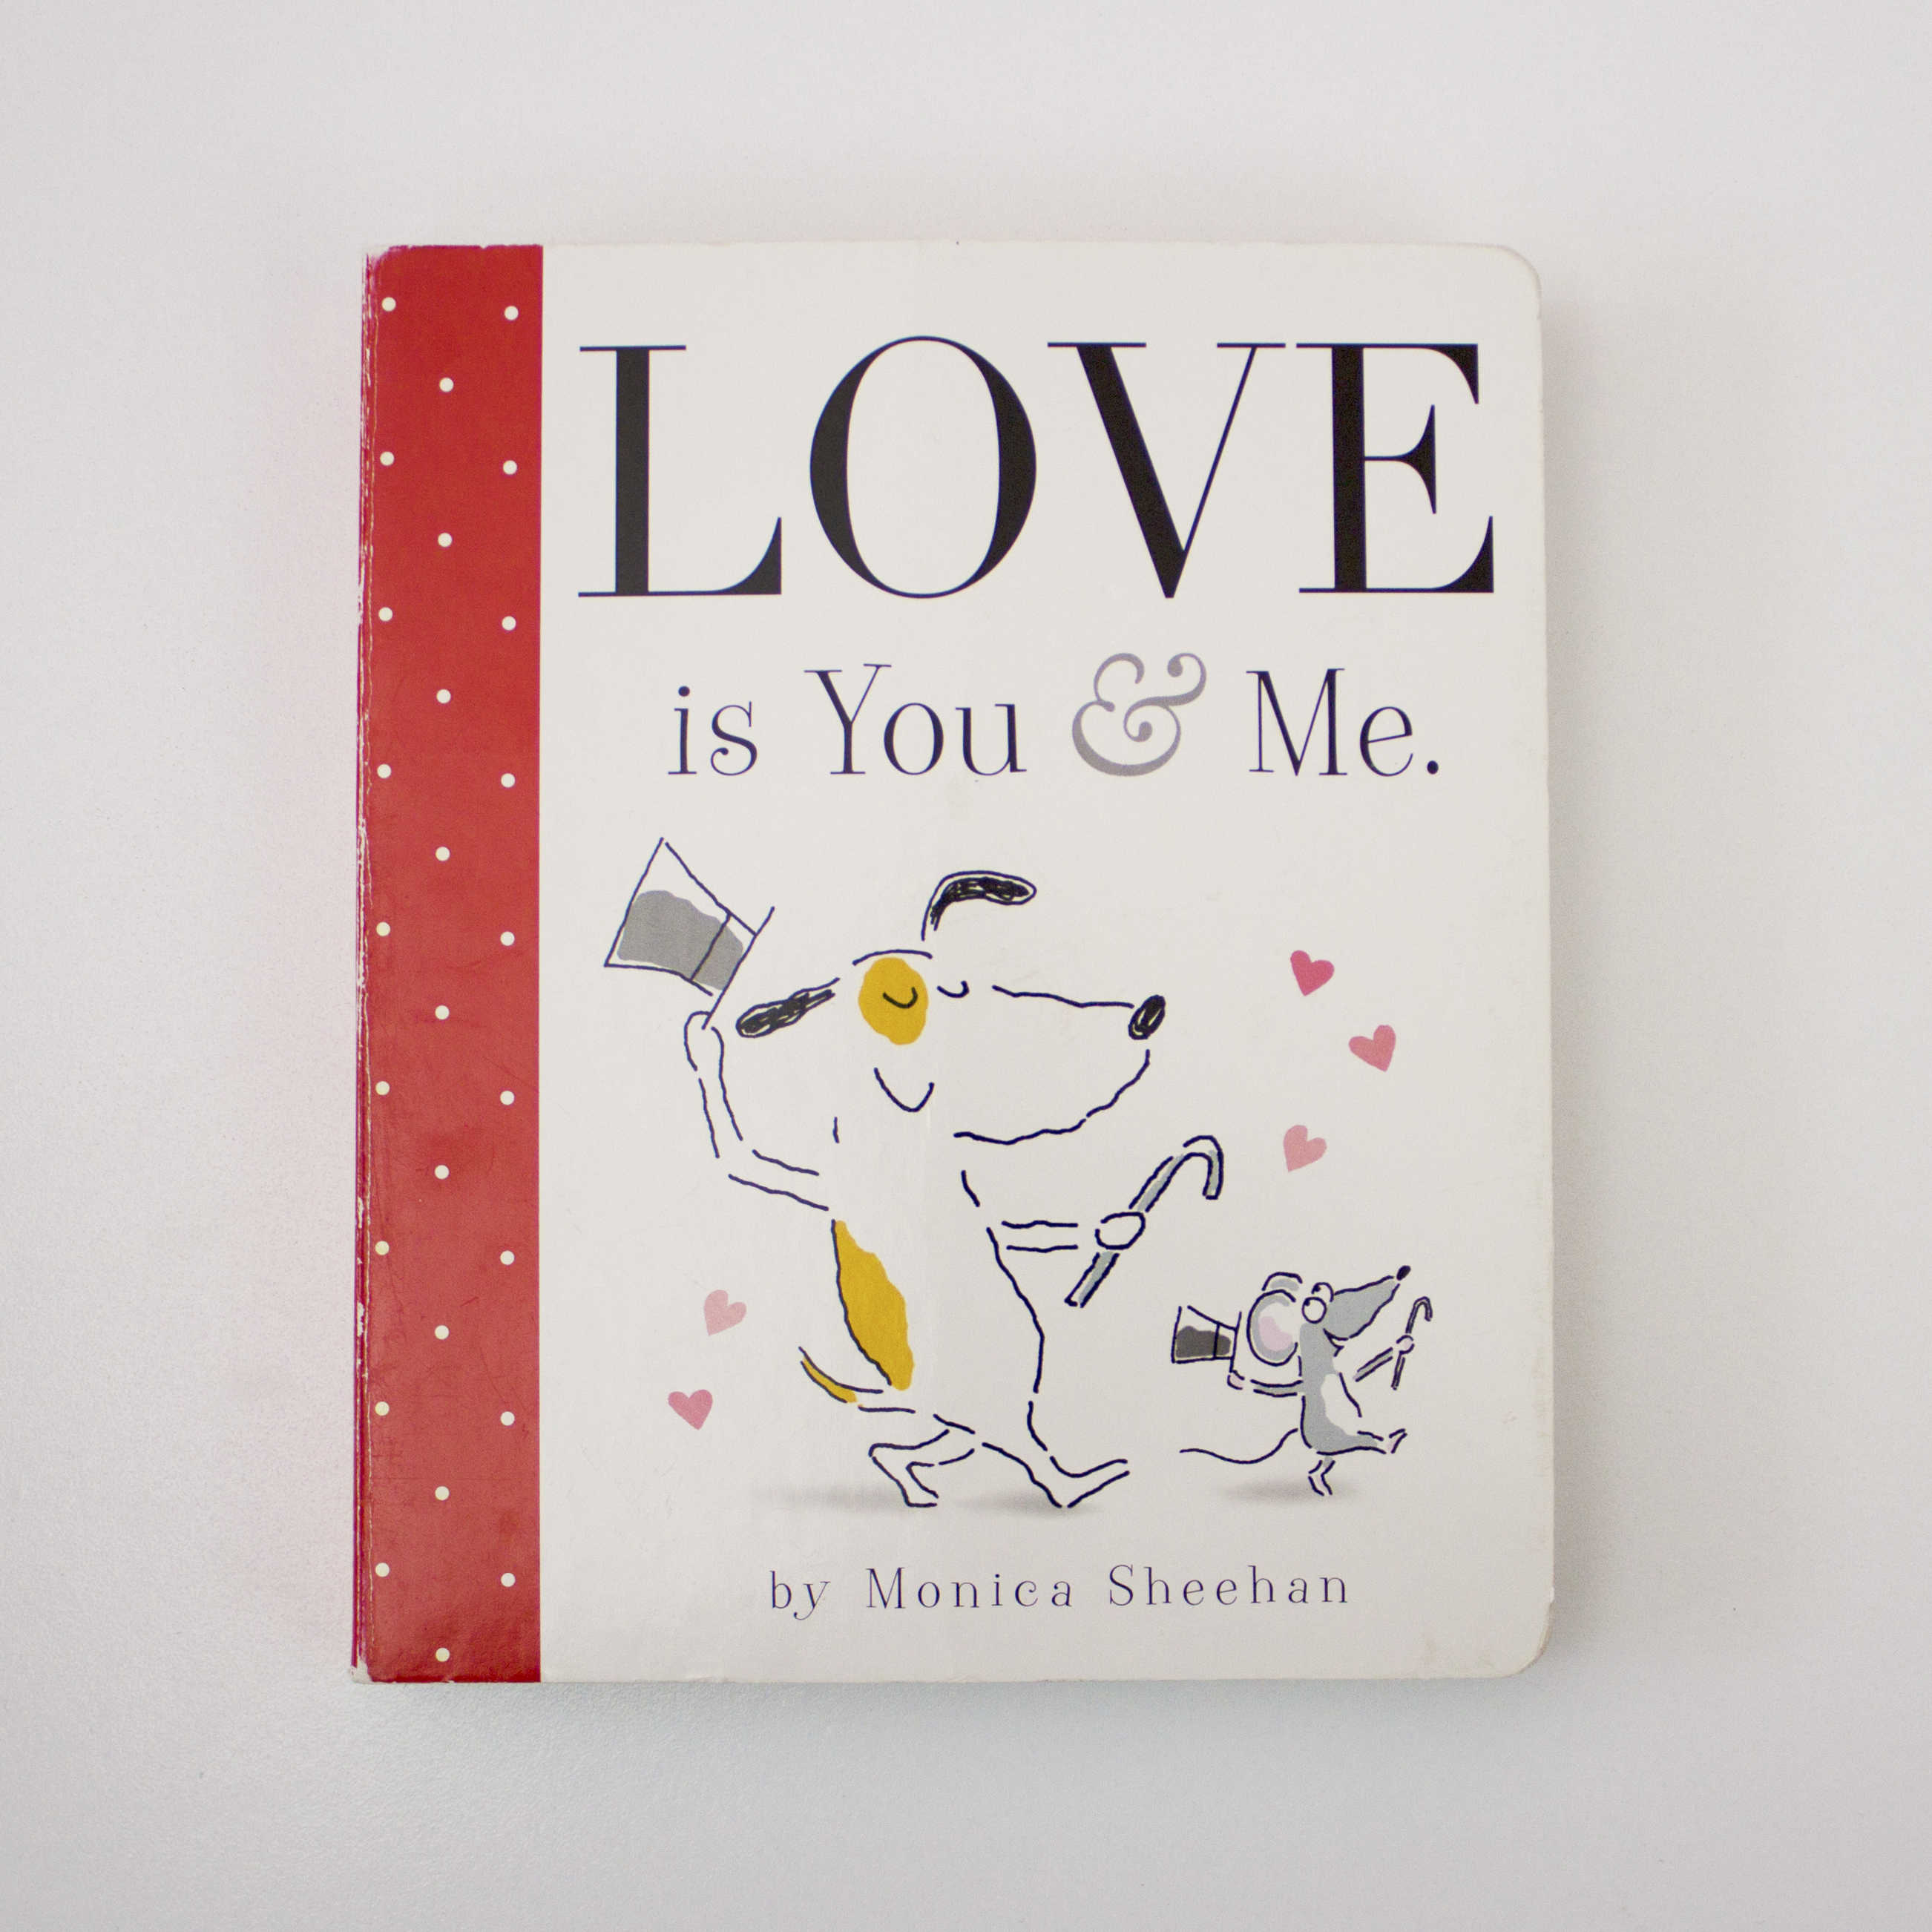 love is you & me book cover